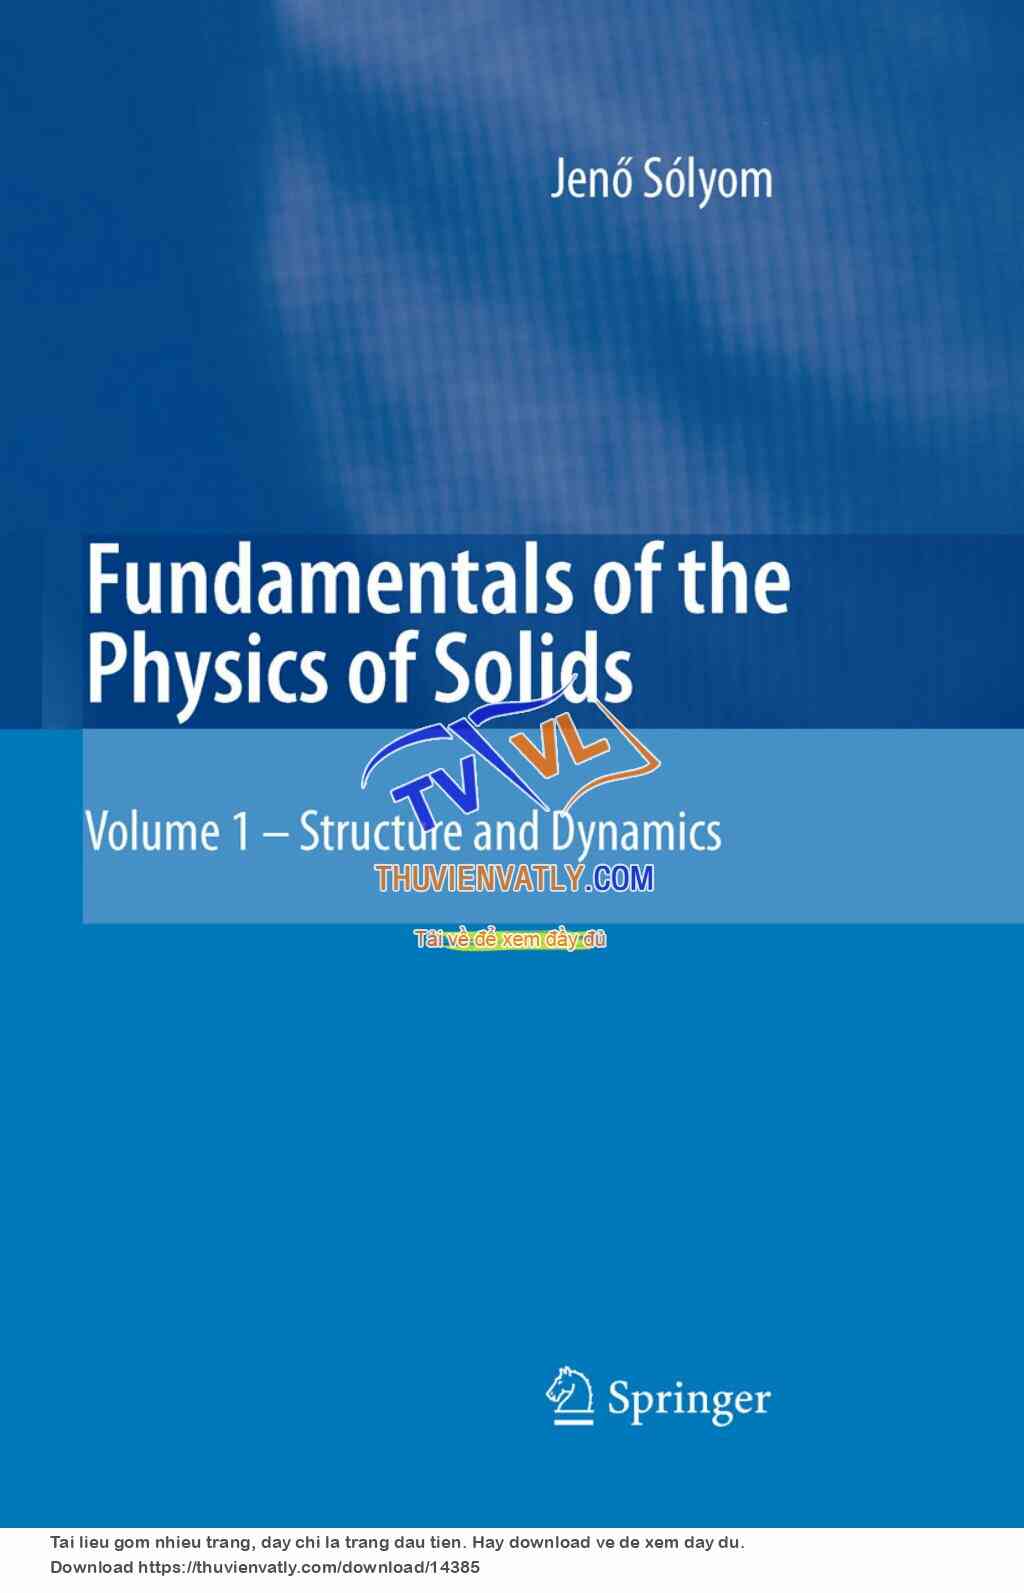 Fundamentals of the Physics of Solid (Jeno Solyom - Springer 2007)